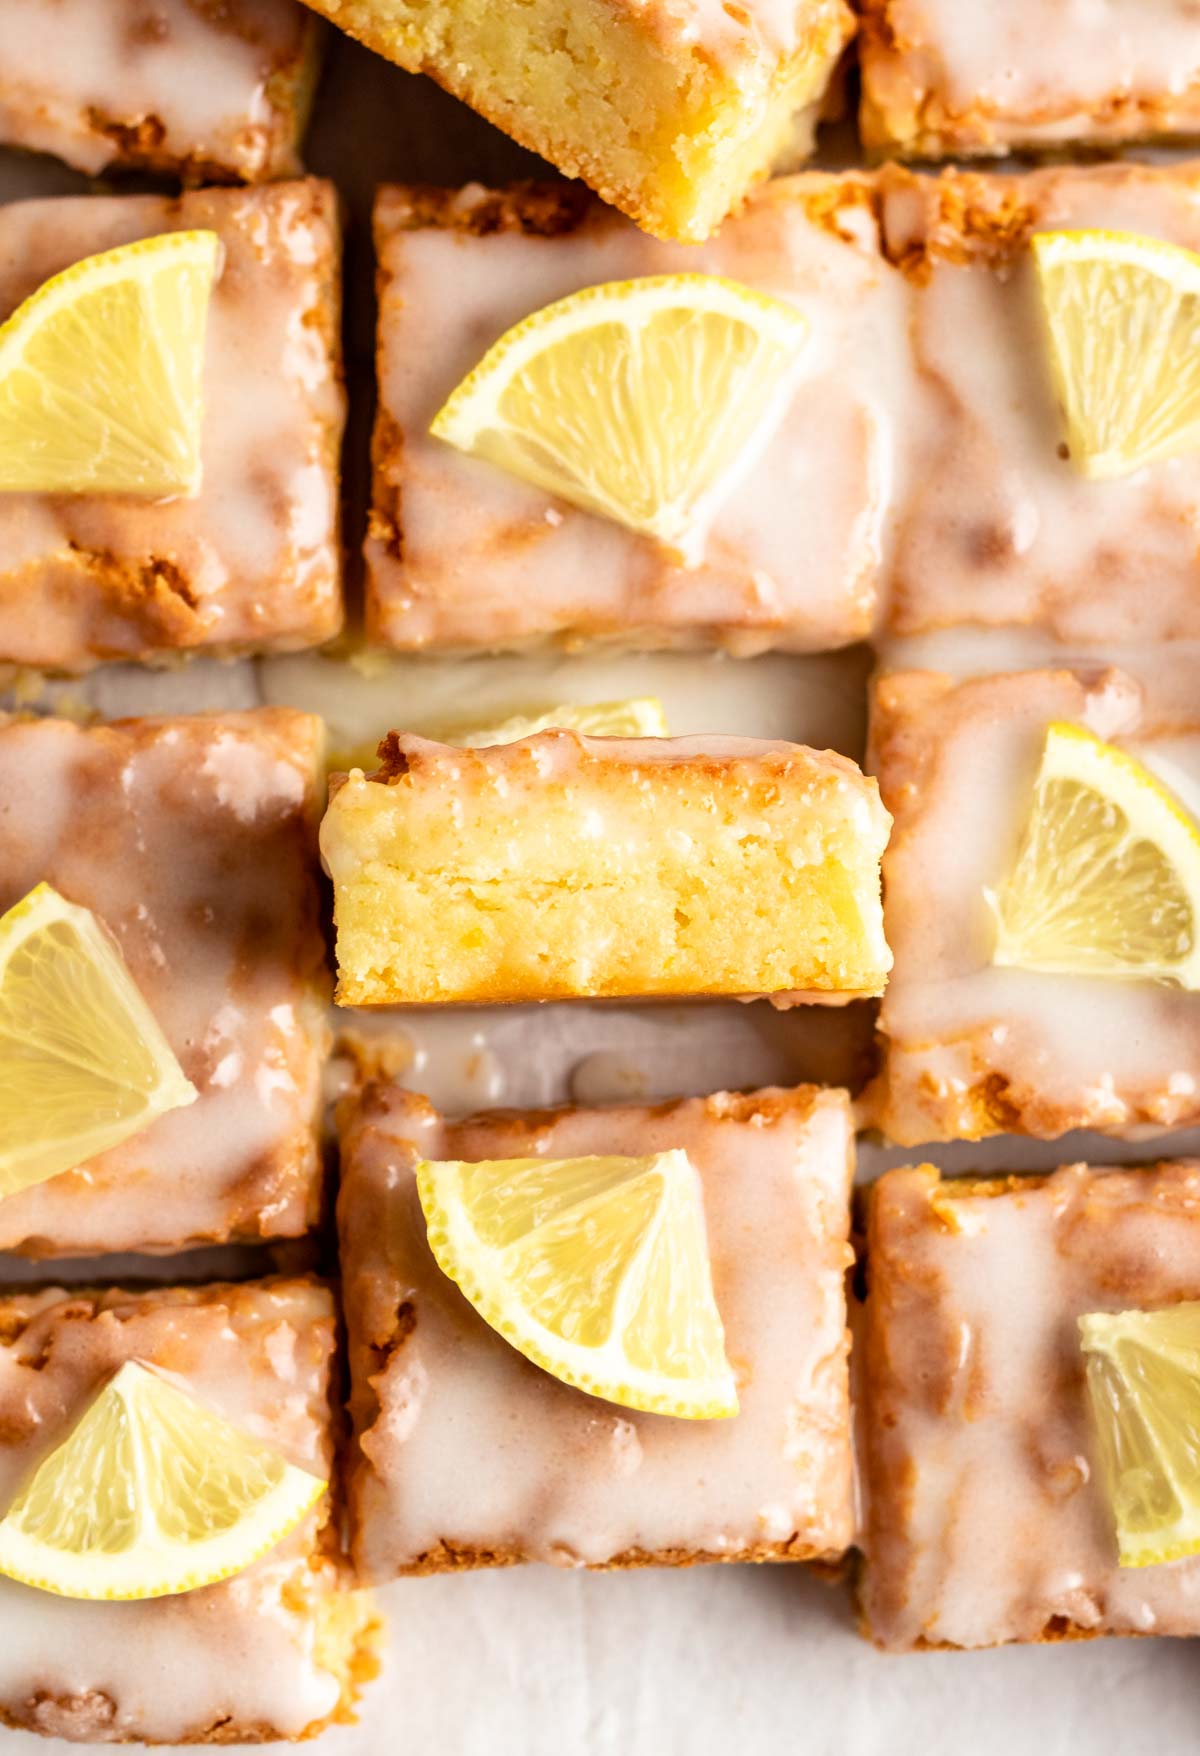 Lemon brownies on a white parchment paper with lemon slices.